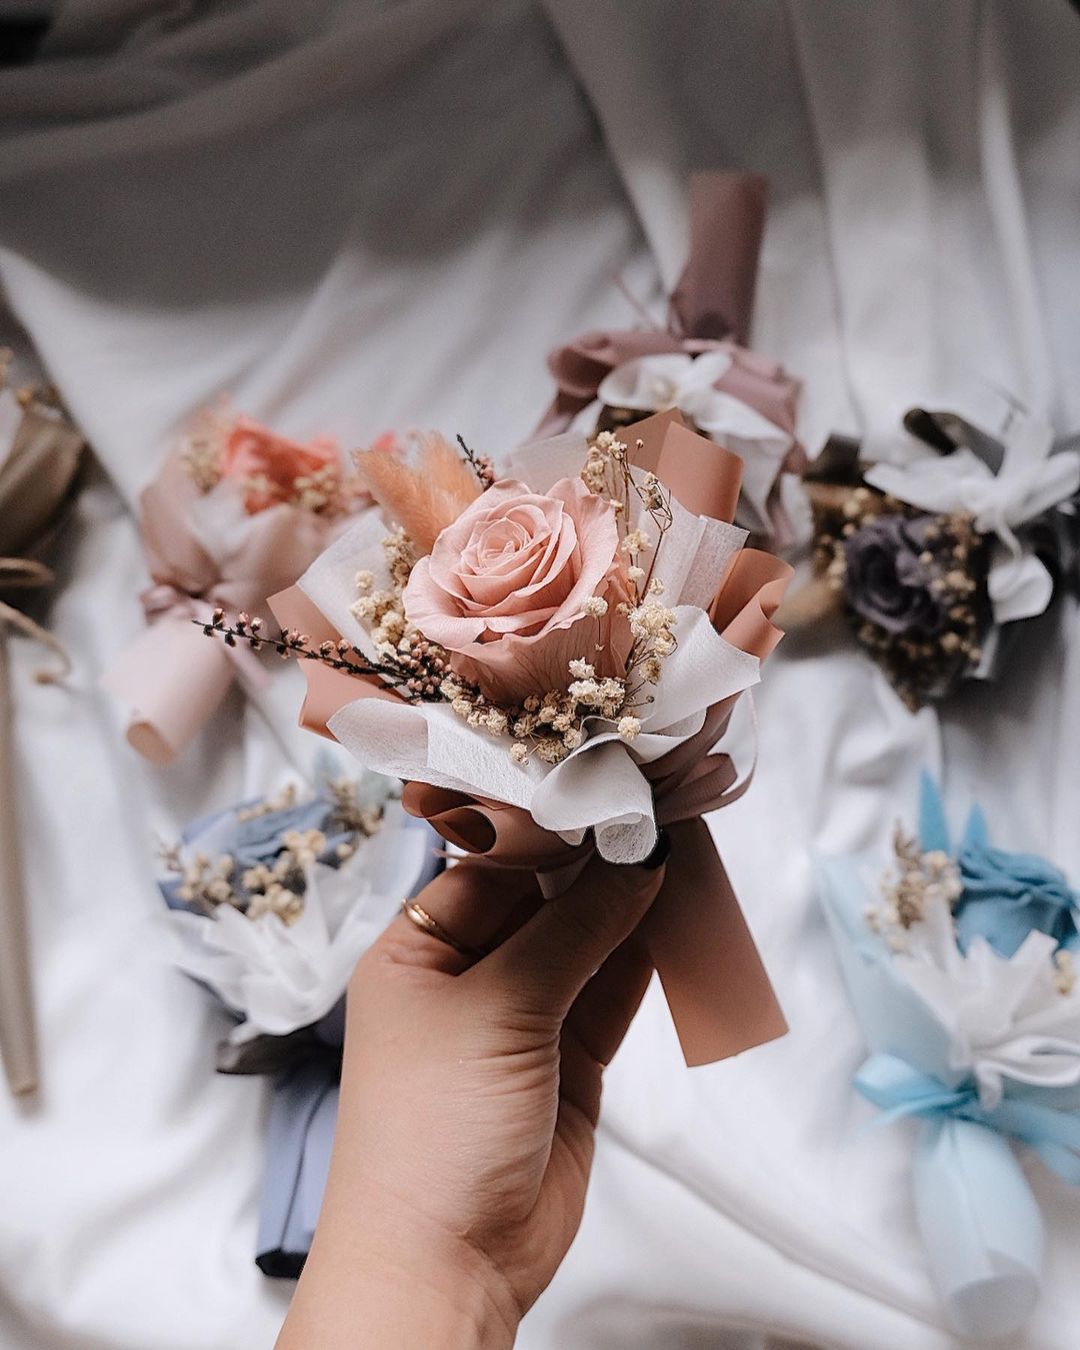 10 Jakarta Florists With Online Delivery Services For Valentine S Day